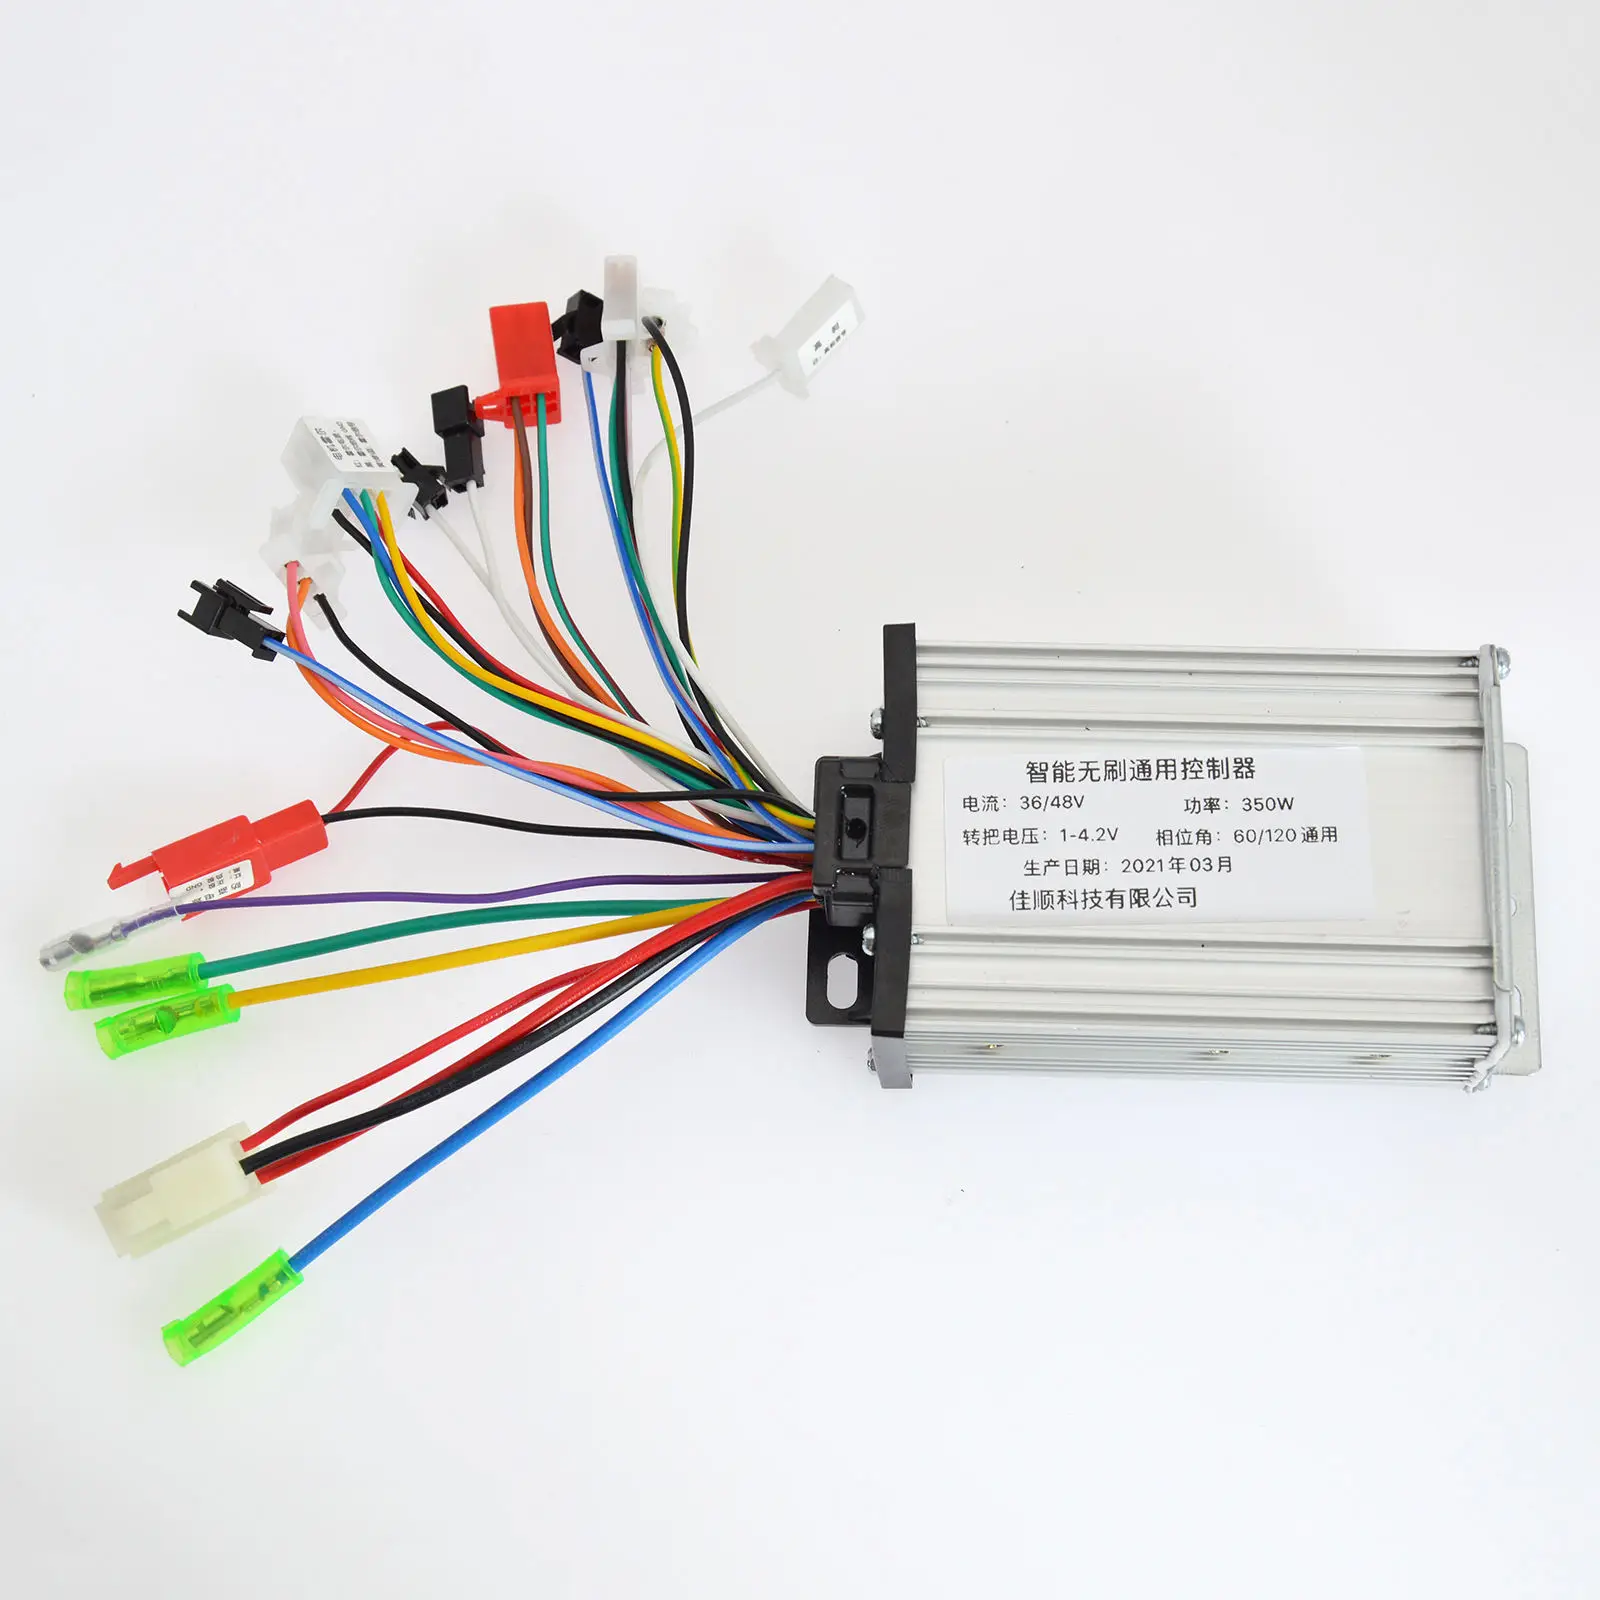 36V/48V 350W Electric Bicycle Controller E-scooter Skateboard E-bike Brushless DC Motor Speed Controller Control Box